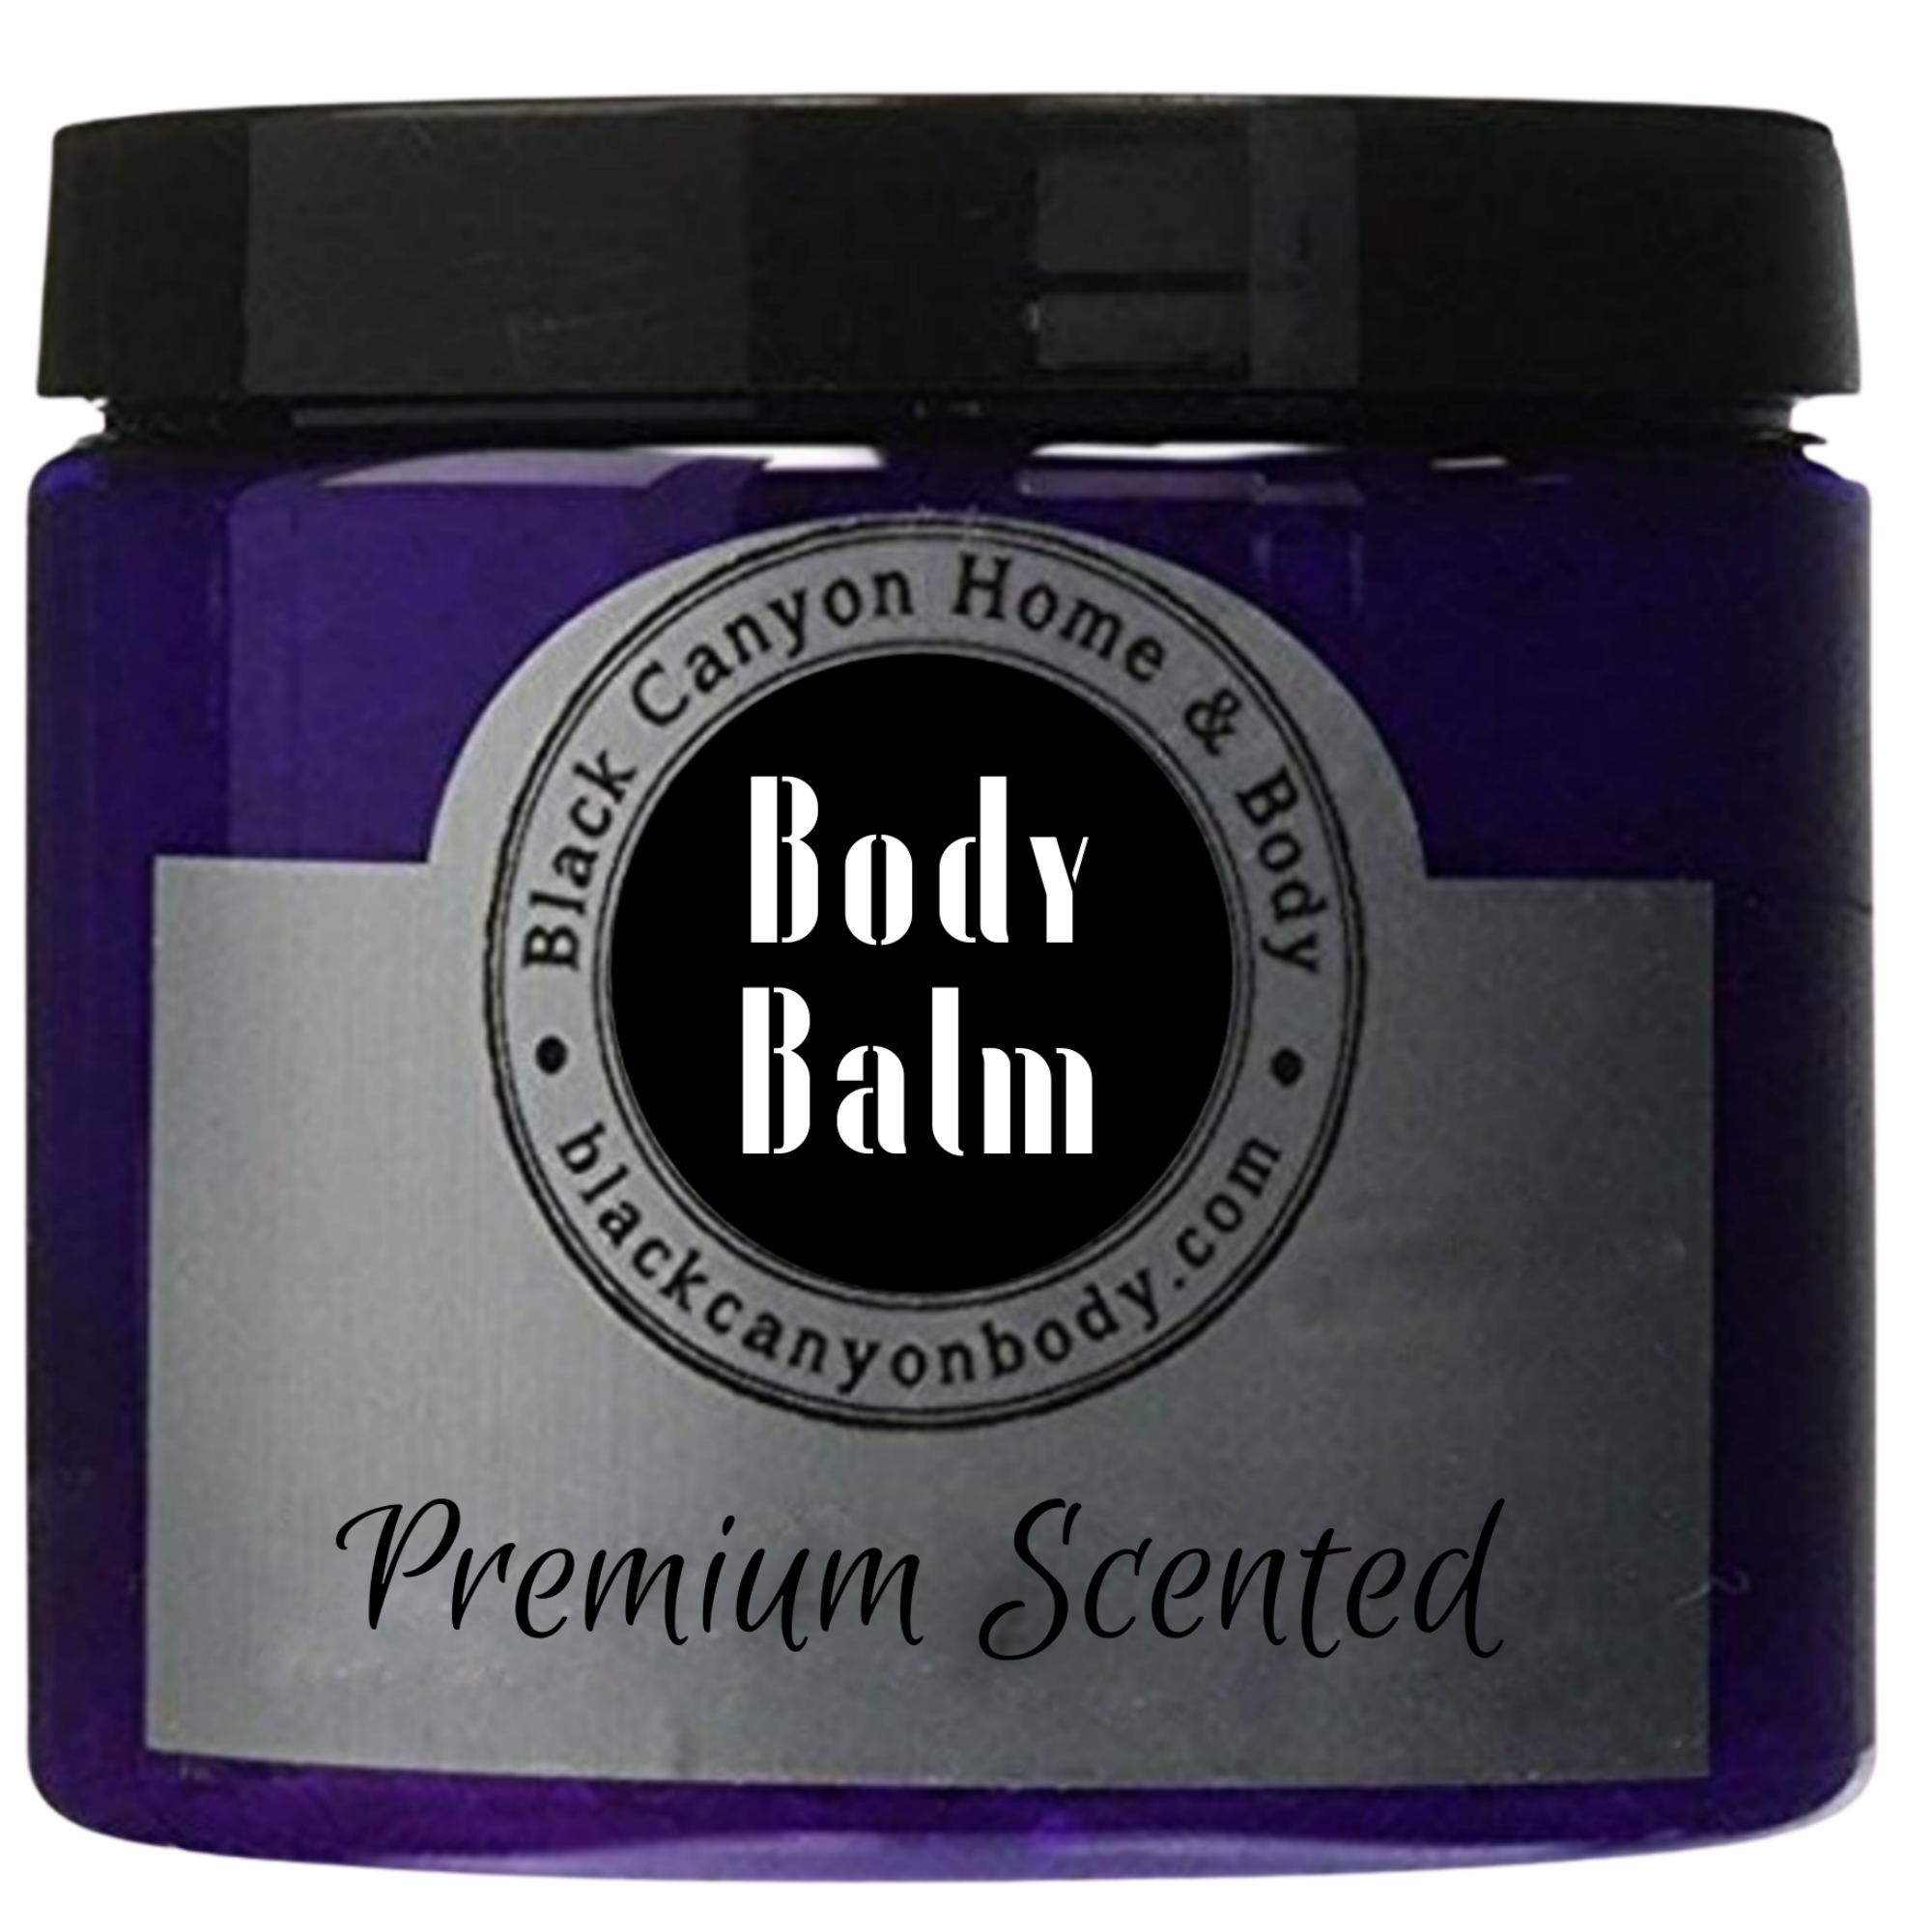 Black Canyon Witches Brew Scented Natural Body Balm with Shea